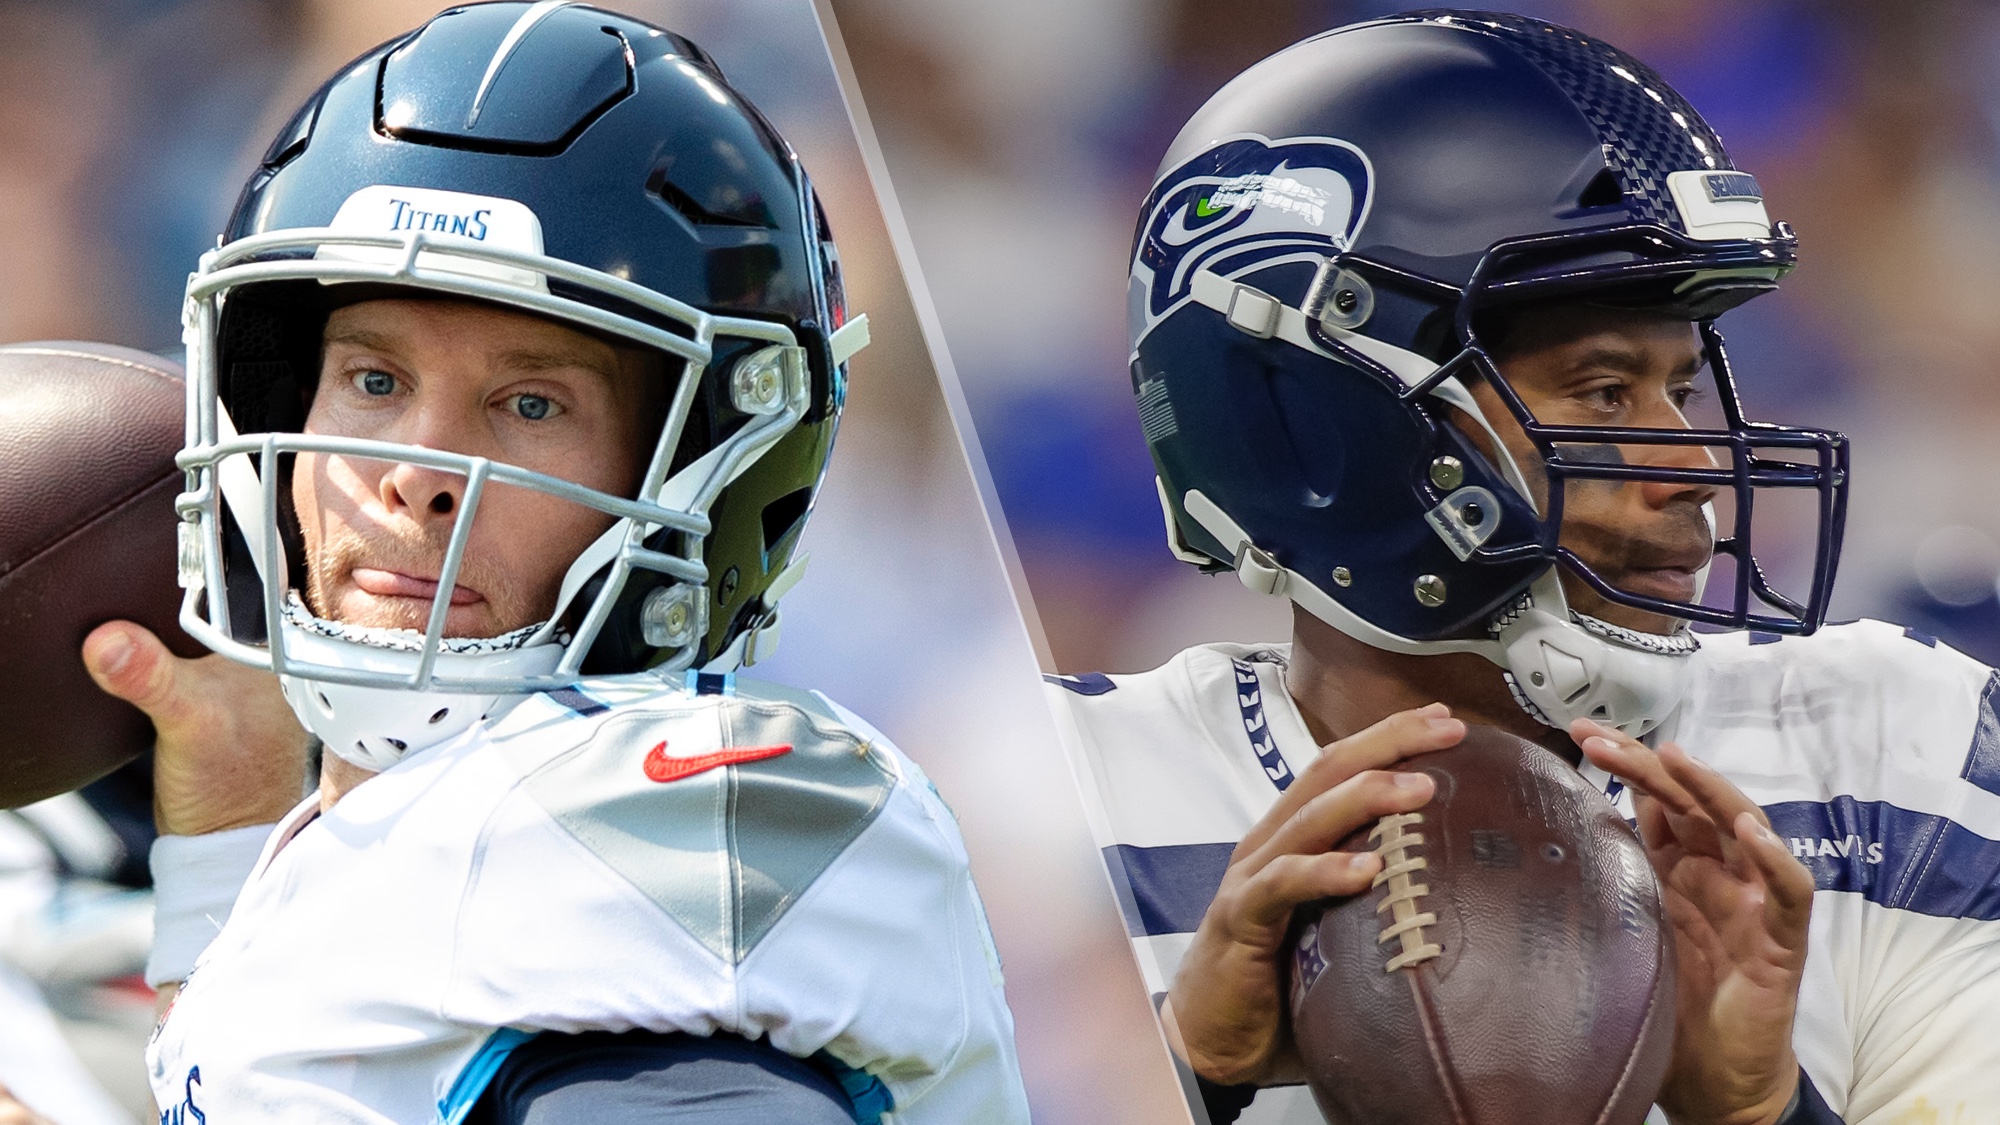 Titans vs Seahawks live stream: How to watch NFL week 2 game online